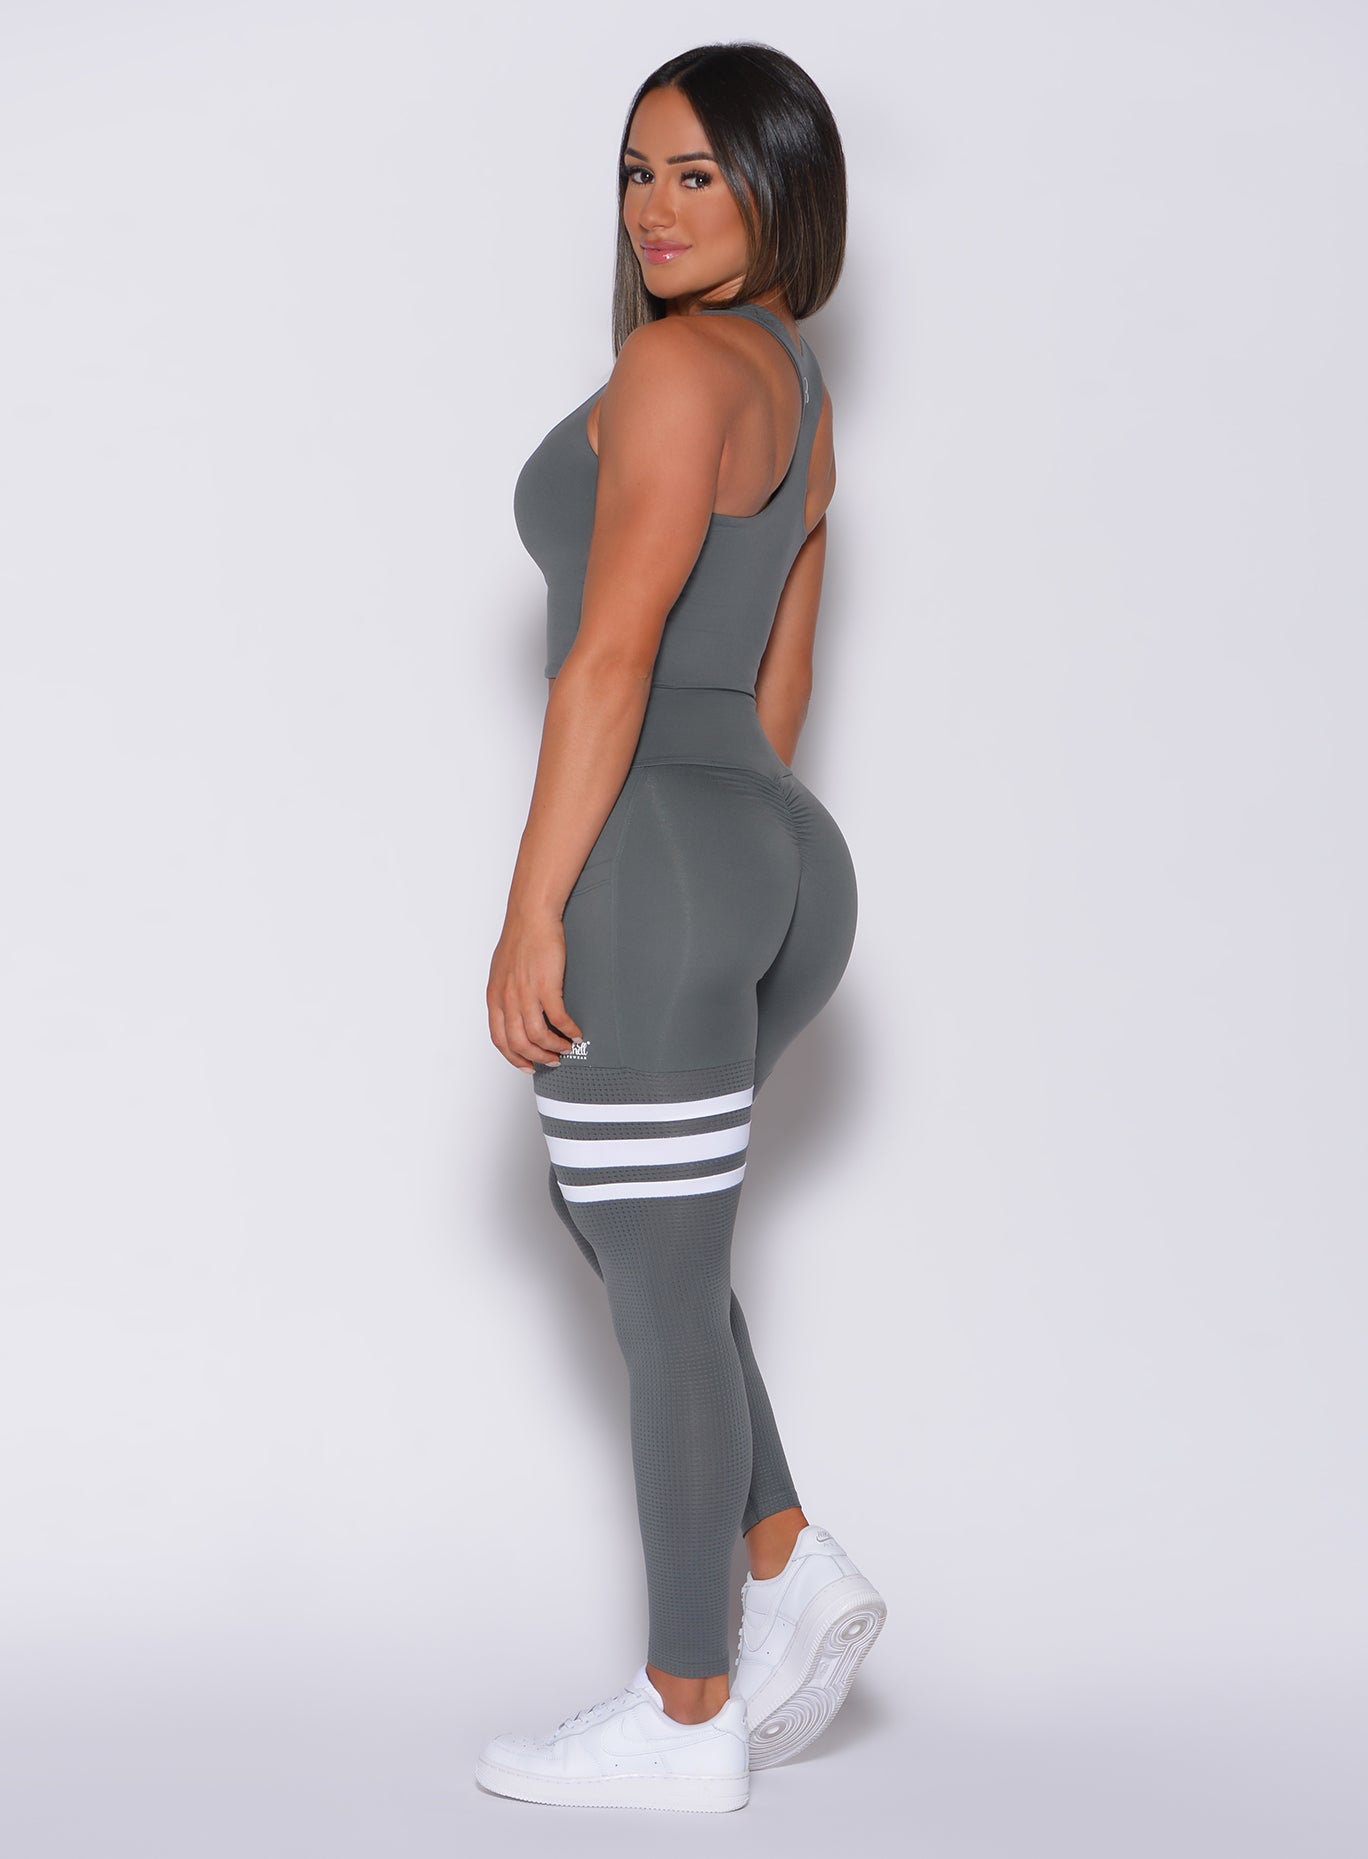 Left side profile view of a model in our scrunch thigh high in steel gray color and a matching sports bra